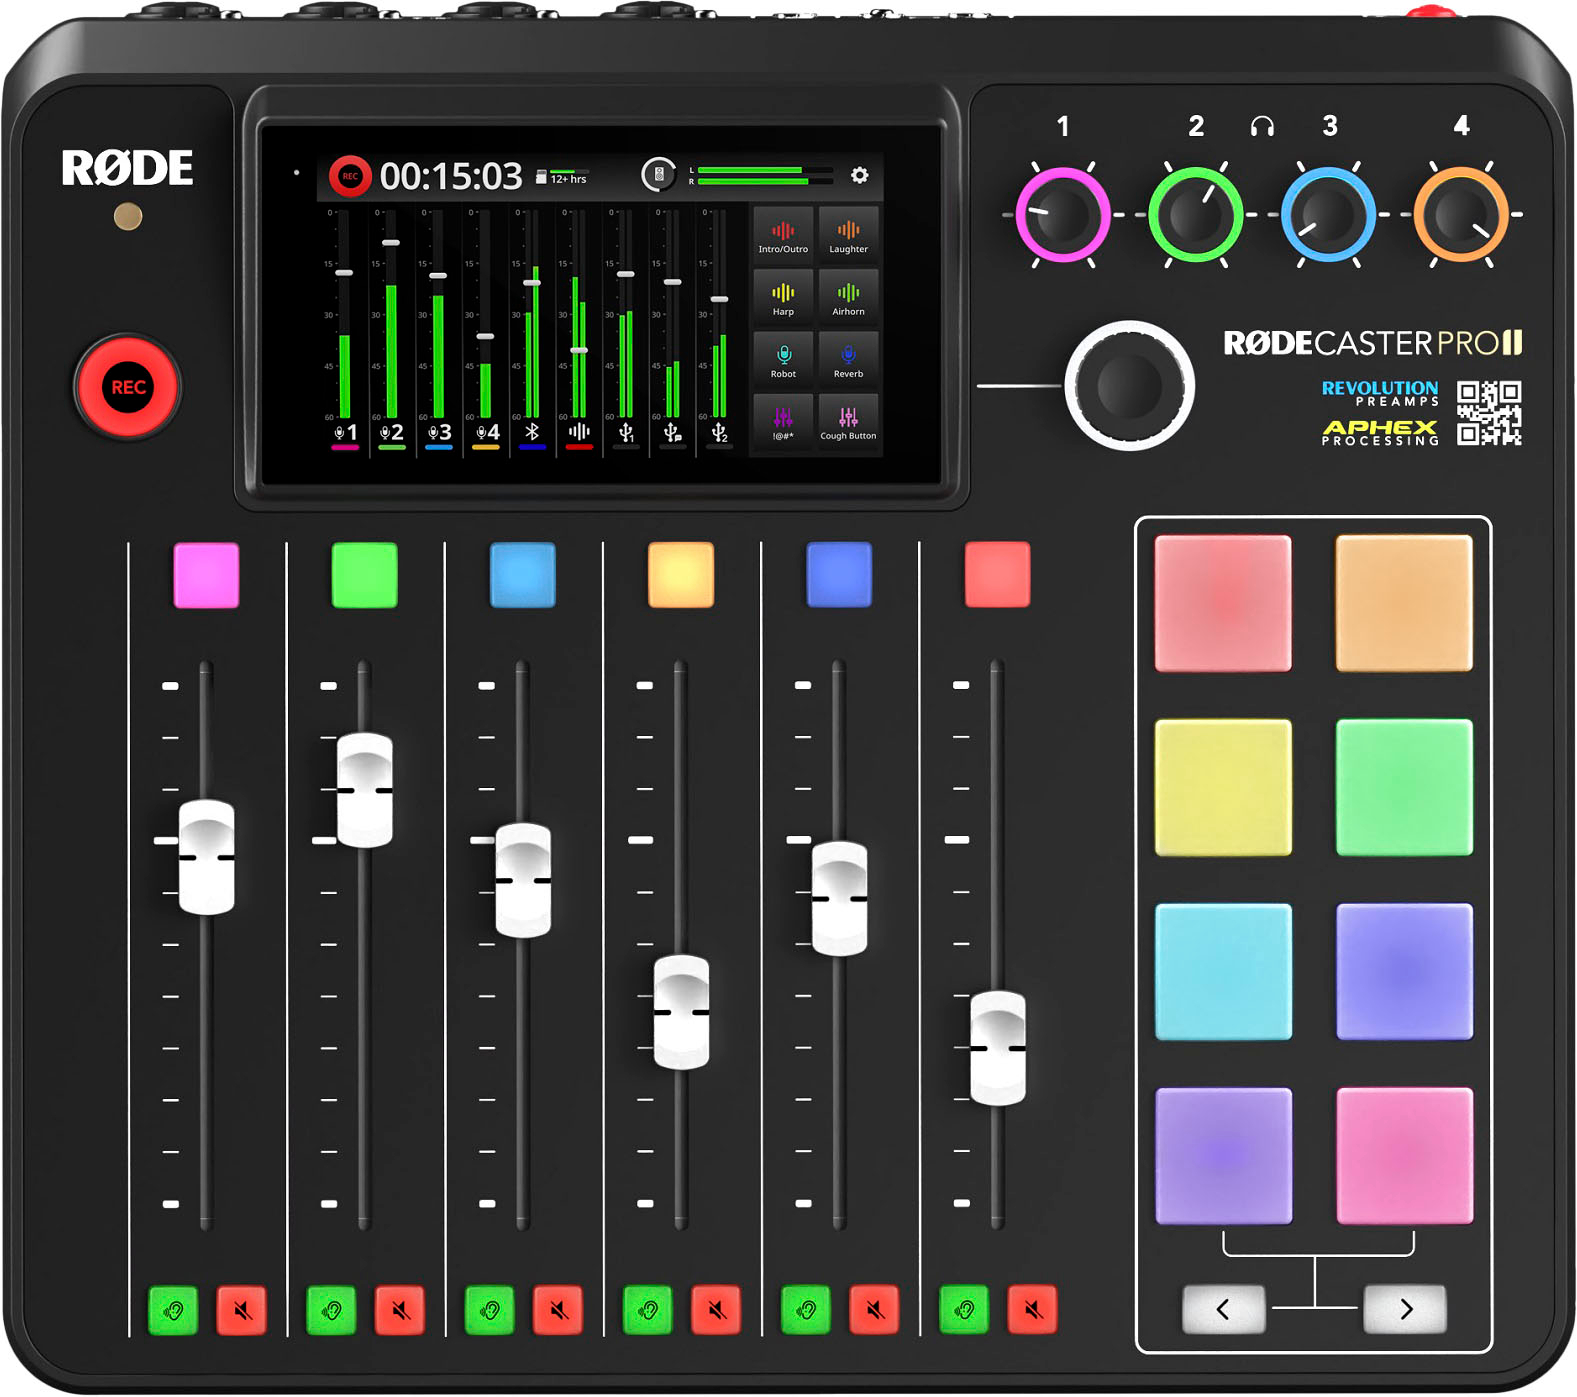 Rode RODECaster Pro II - Integrated Audio Production Studio